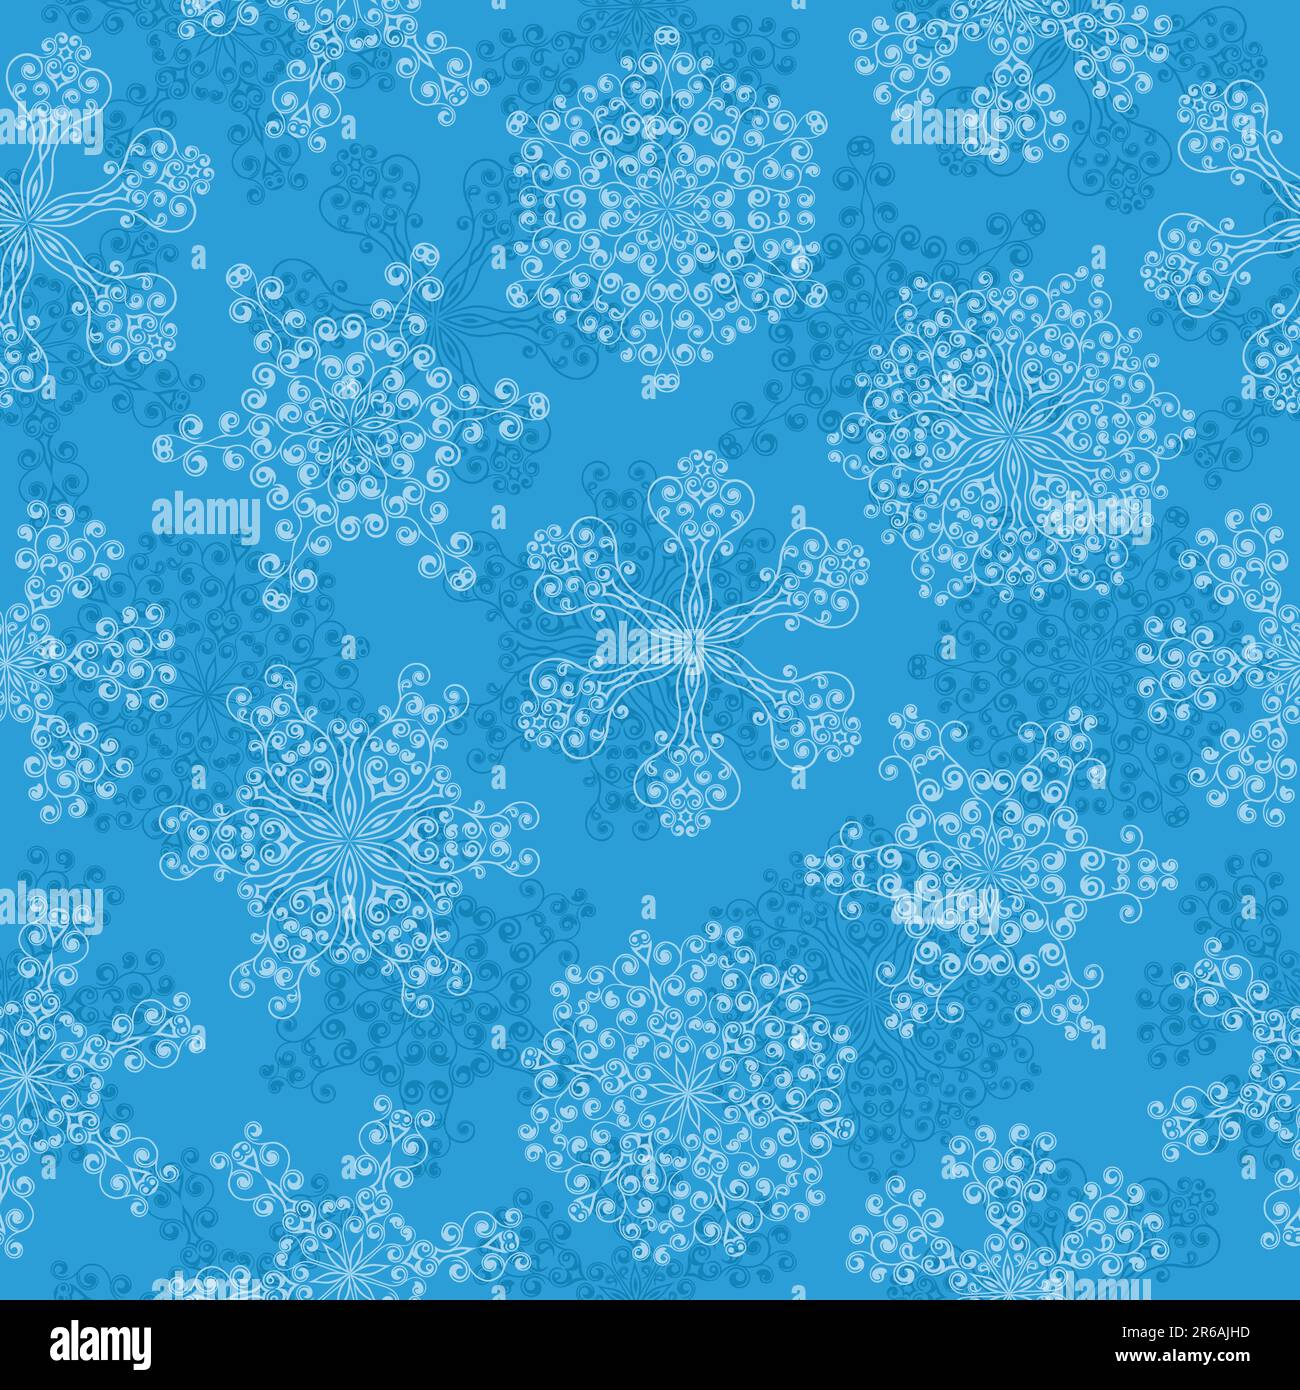 Seamless pattern with a snowflakes. Vector illustration. Stock Vector